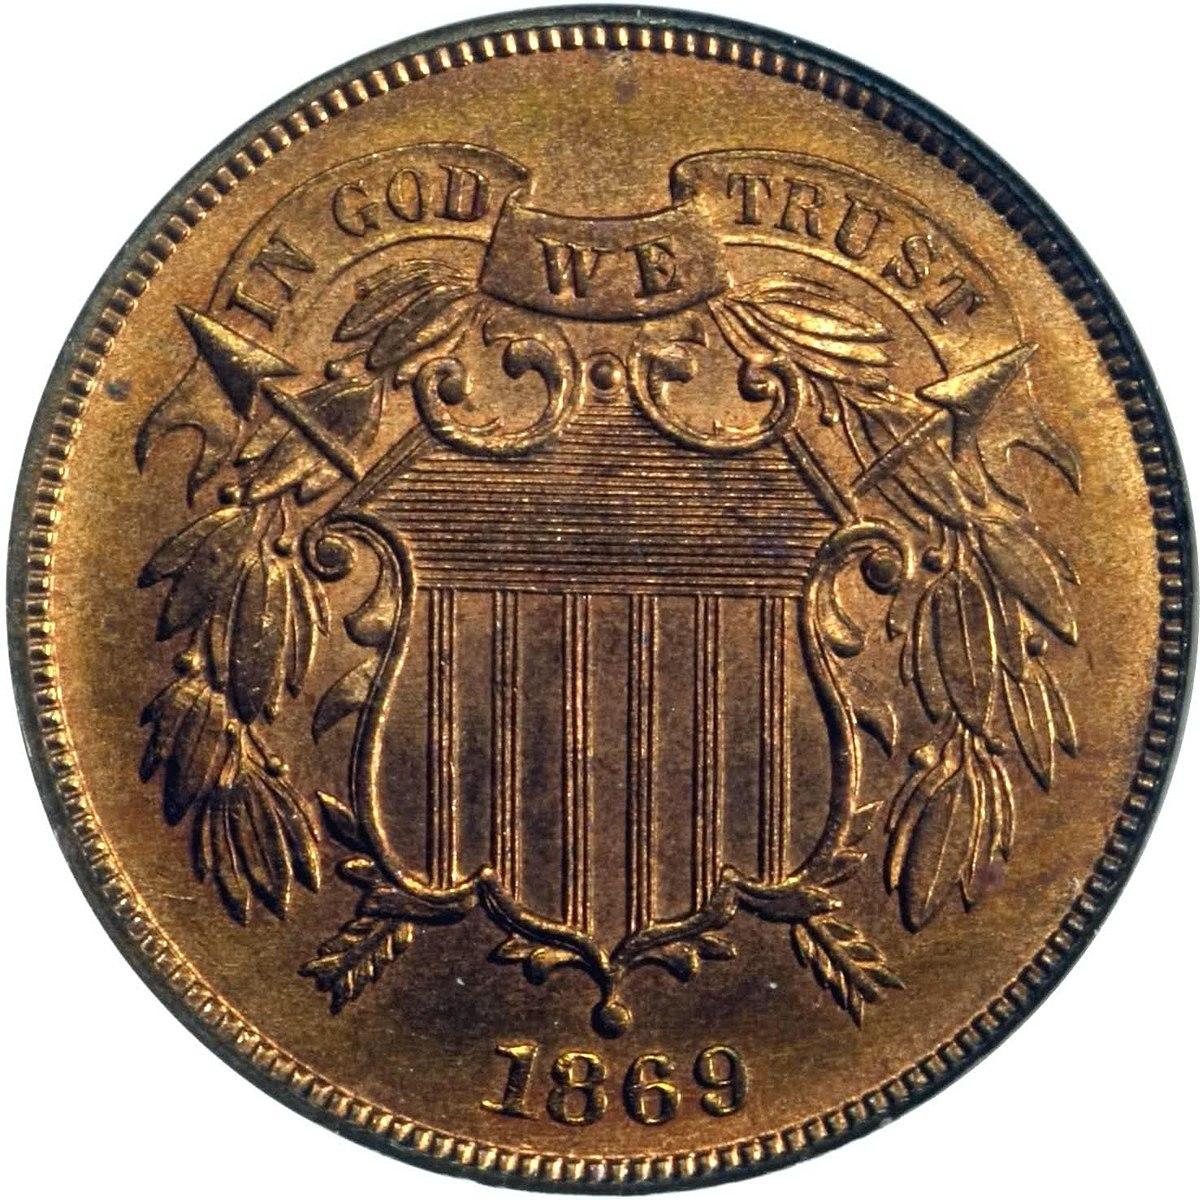 The two-cent piece was the first American coin to be minted with the phrase "In God We Trust." (Public Domain)